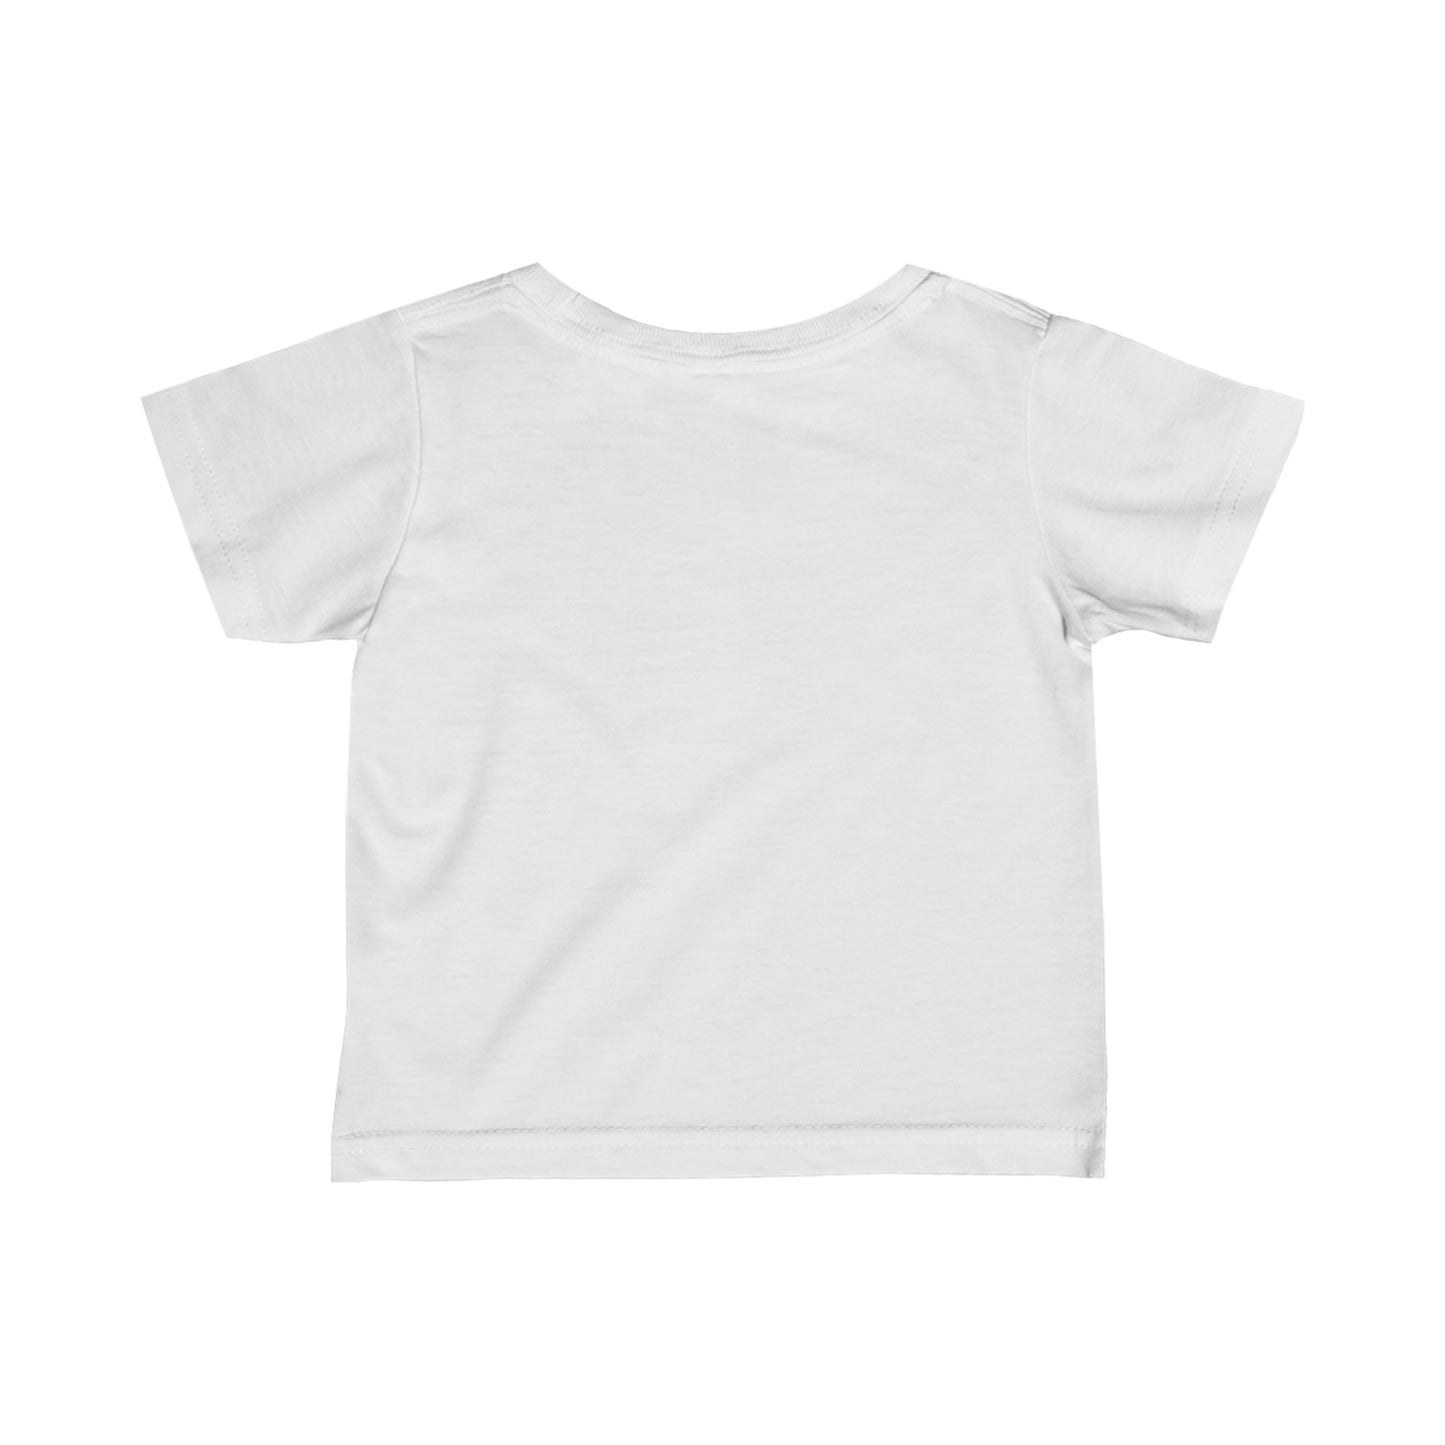 Infant One Love Fine Jersey Tee by Flavor's